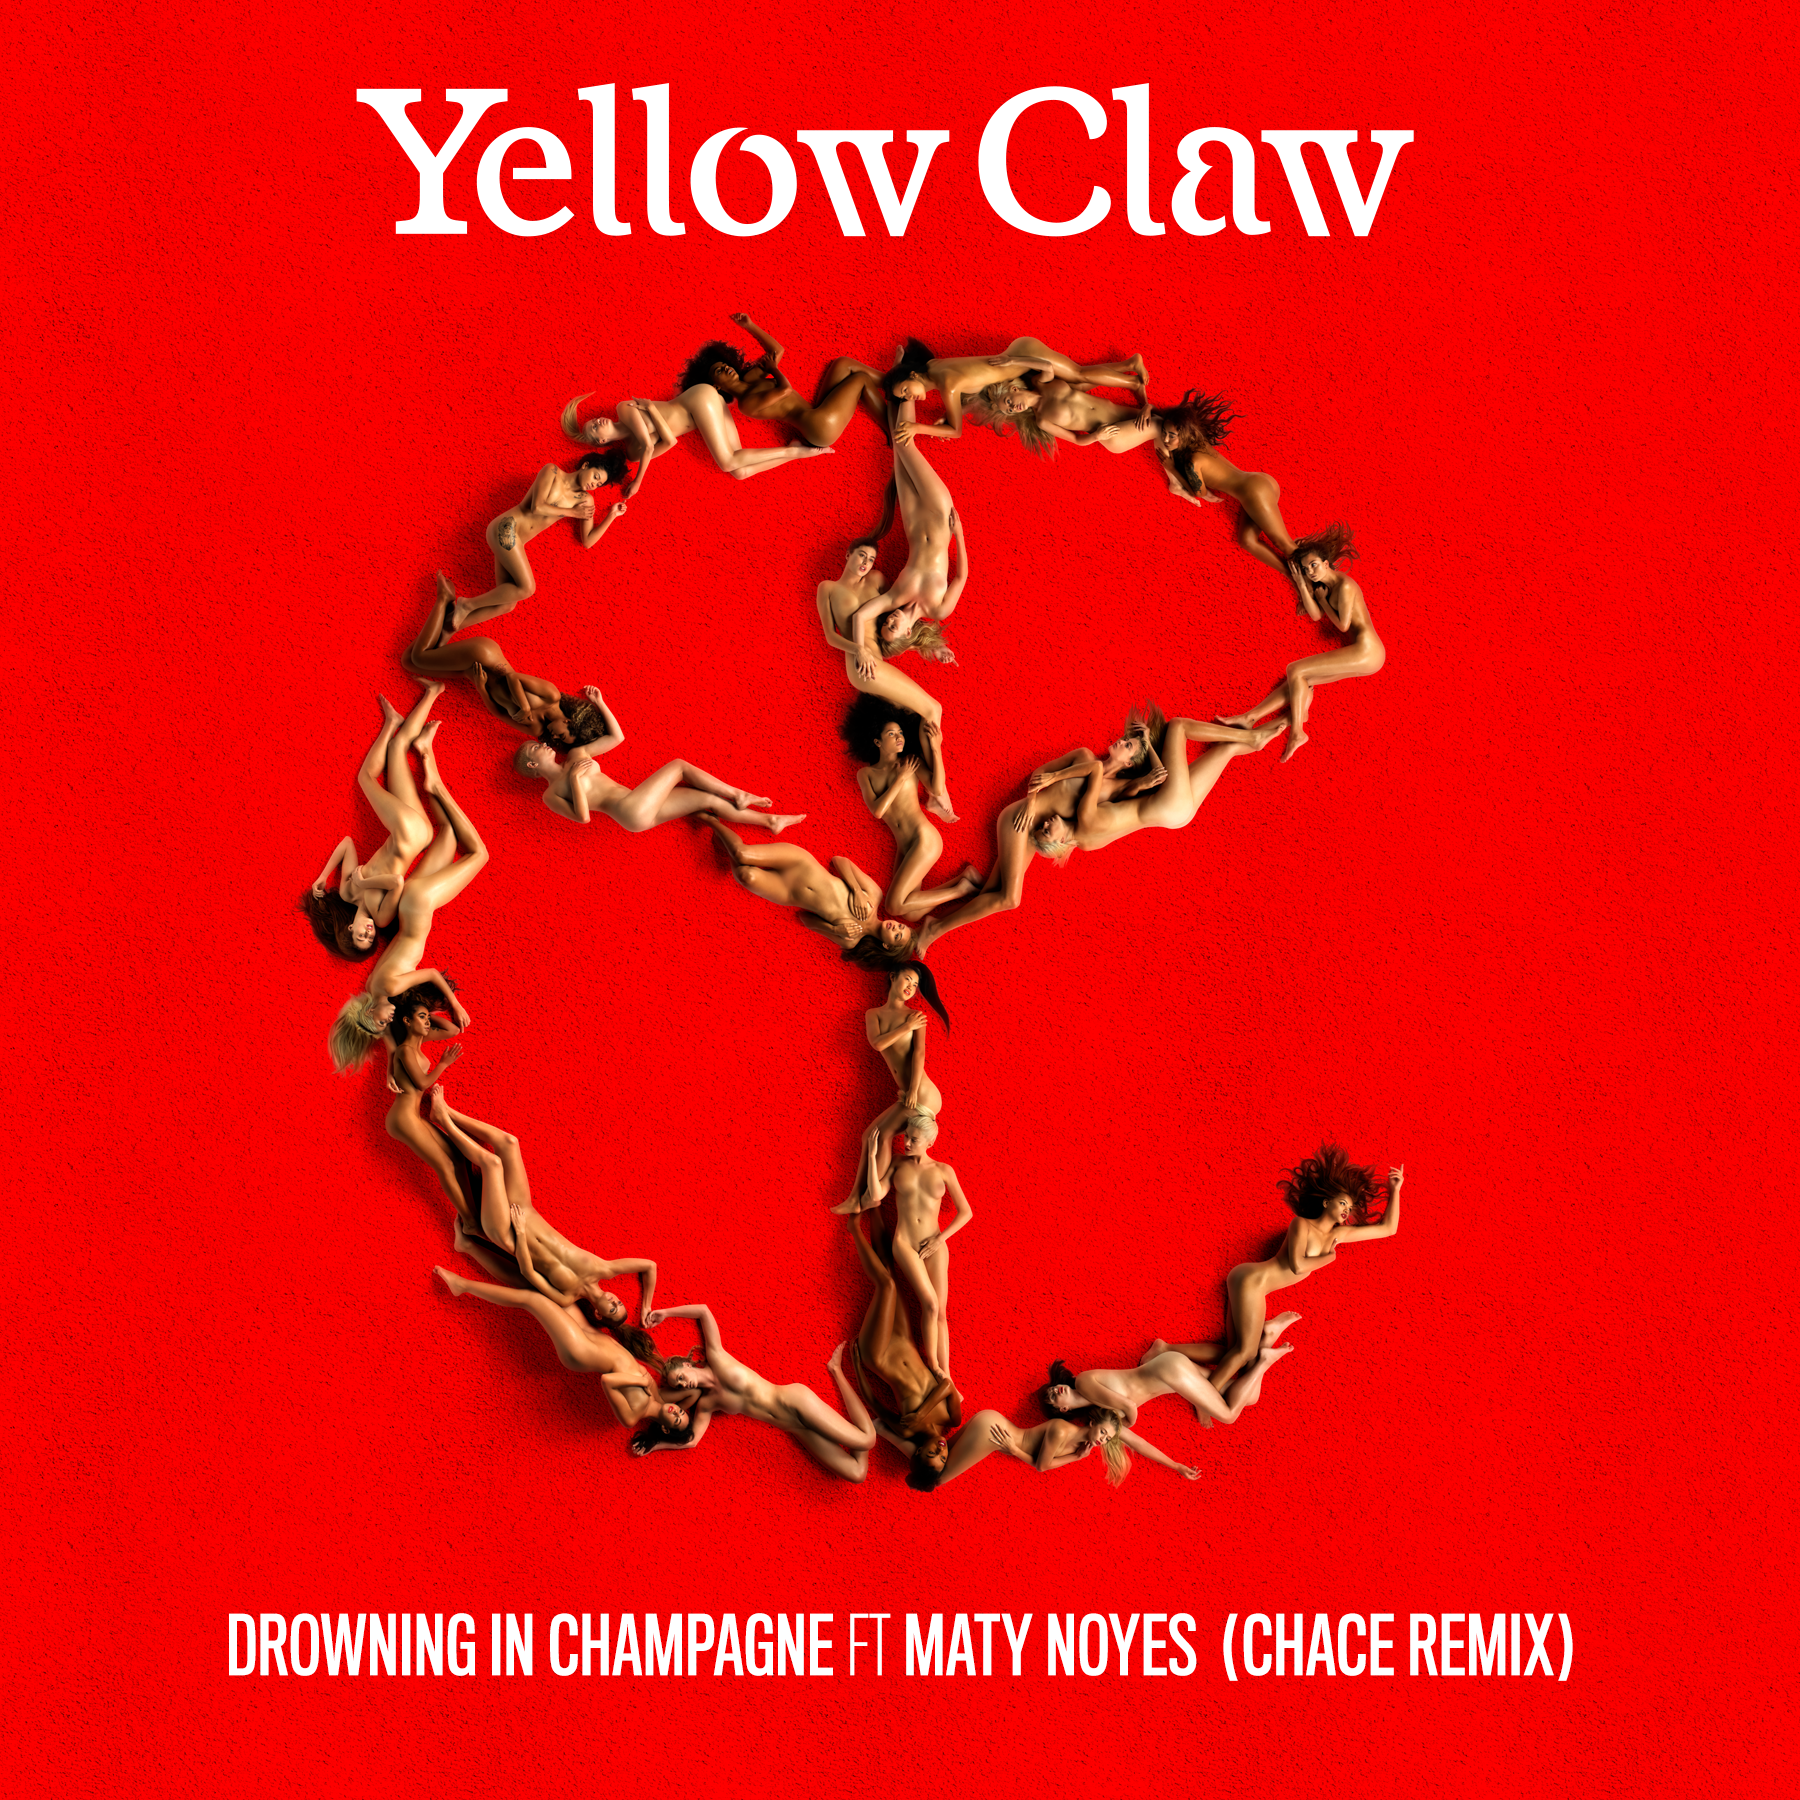 Drowning in Champagne (feat. Maty Noyes) [Chace Remix]